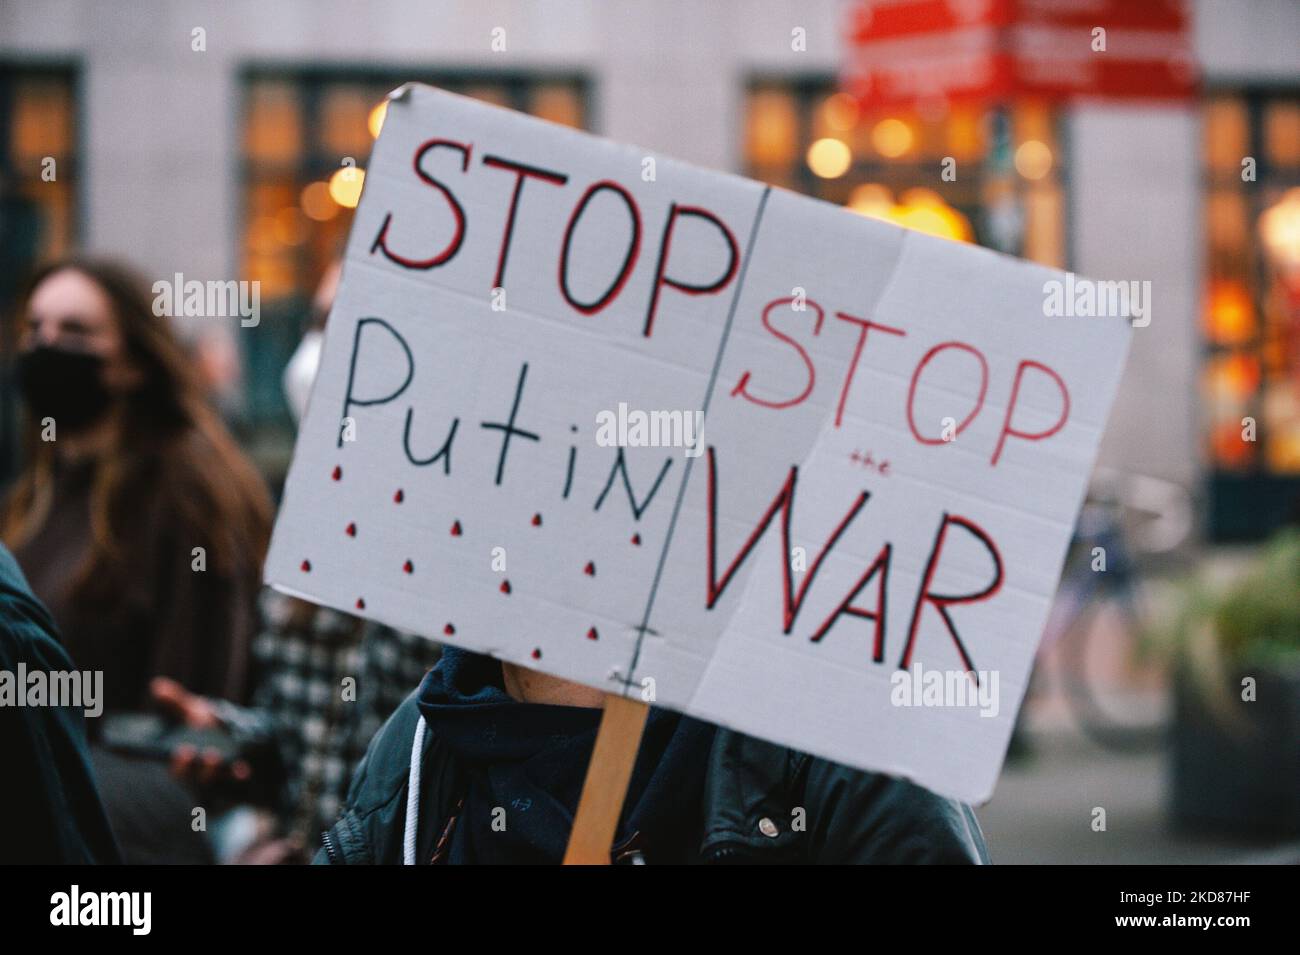 a sign of ' stop putins war' is seen during the antiwar protest from students of Bonn university in Bonn, Germany on April 22, 2022' (Photo by Ying Tang/NurPhoto) Stock Photo